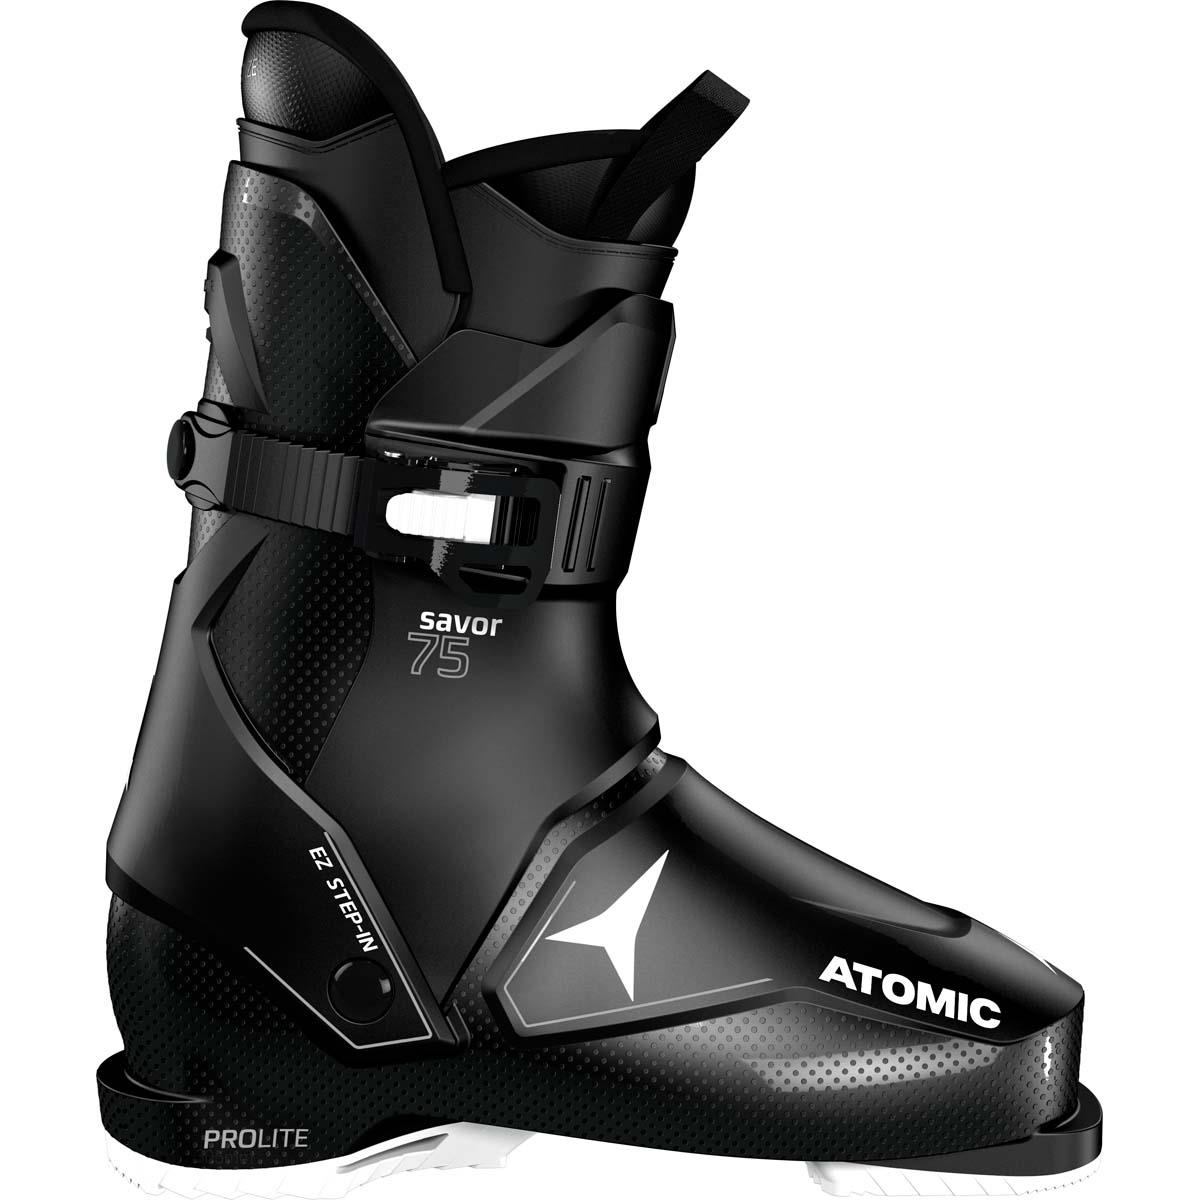 Rear Entry Ski Boots